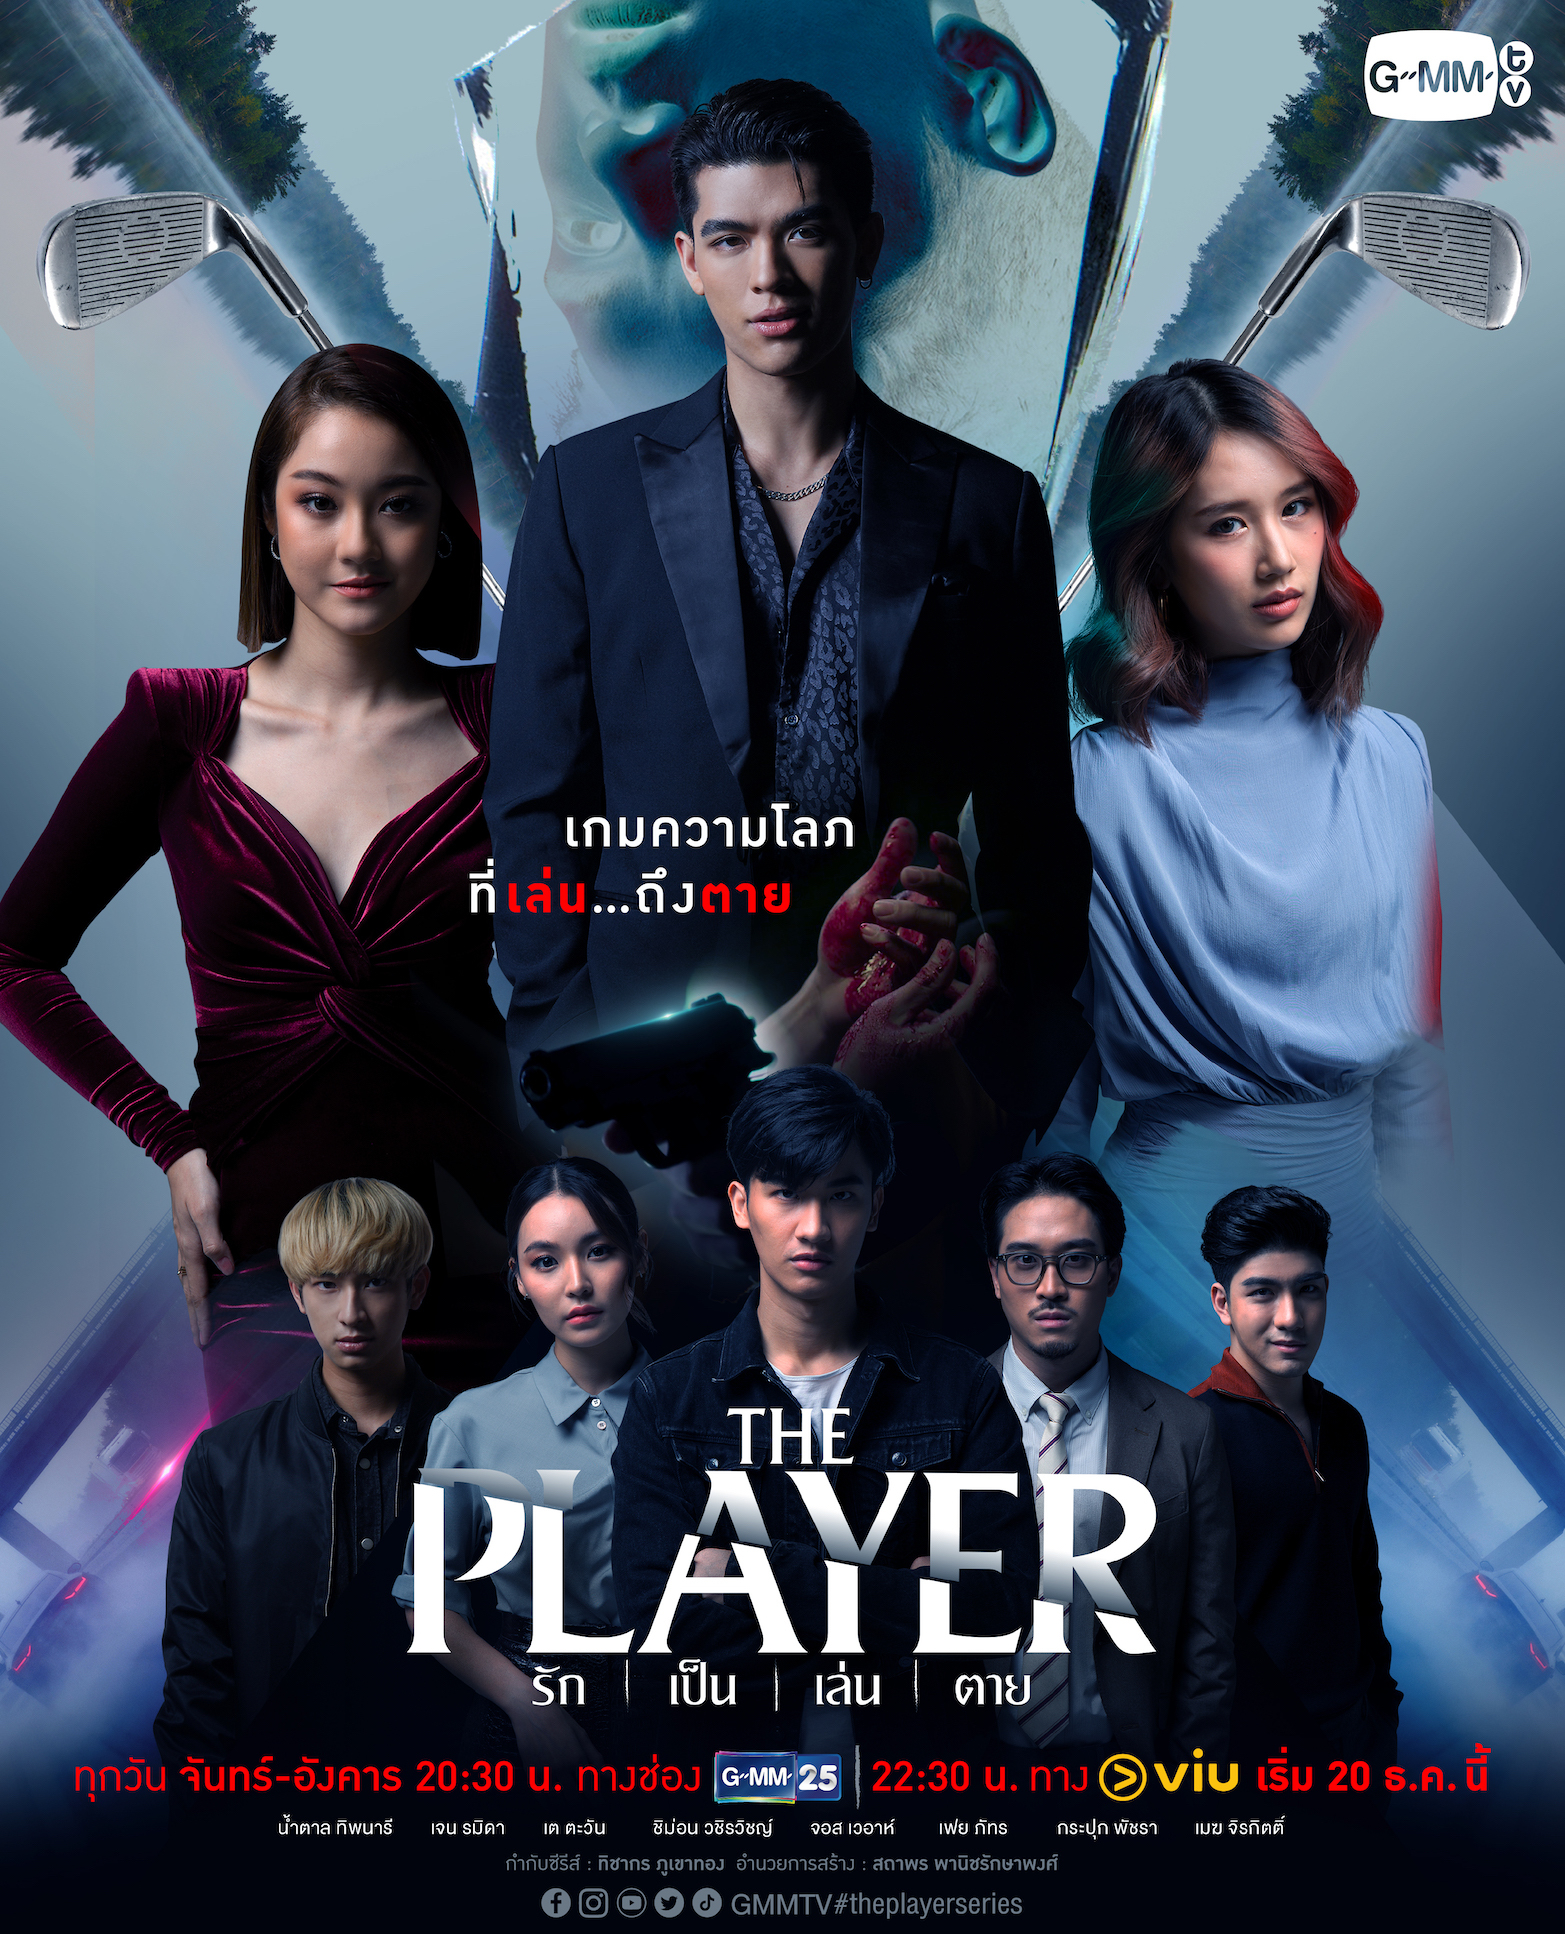 『THE PLAYER』